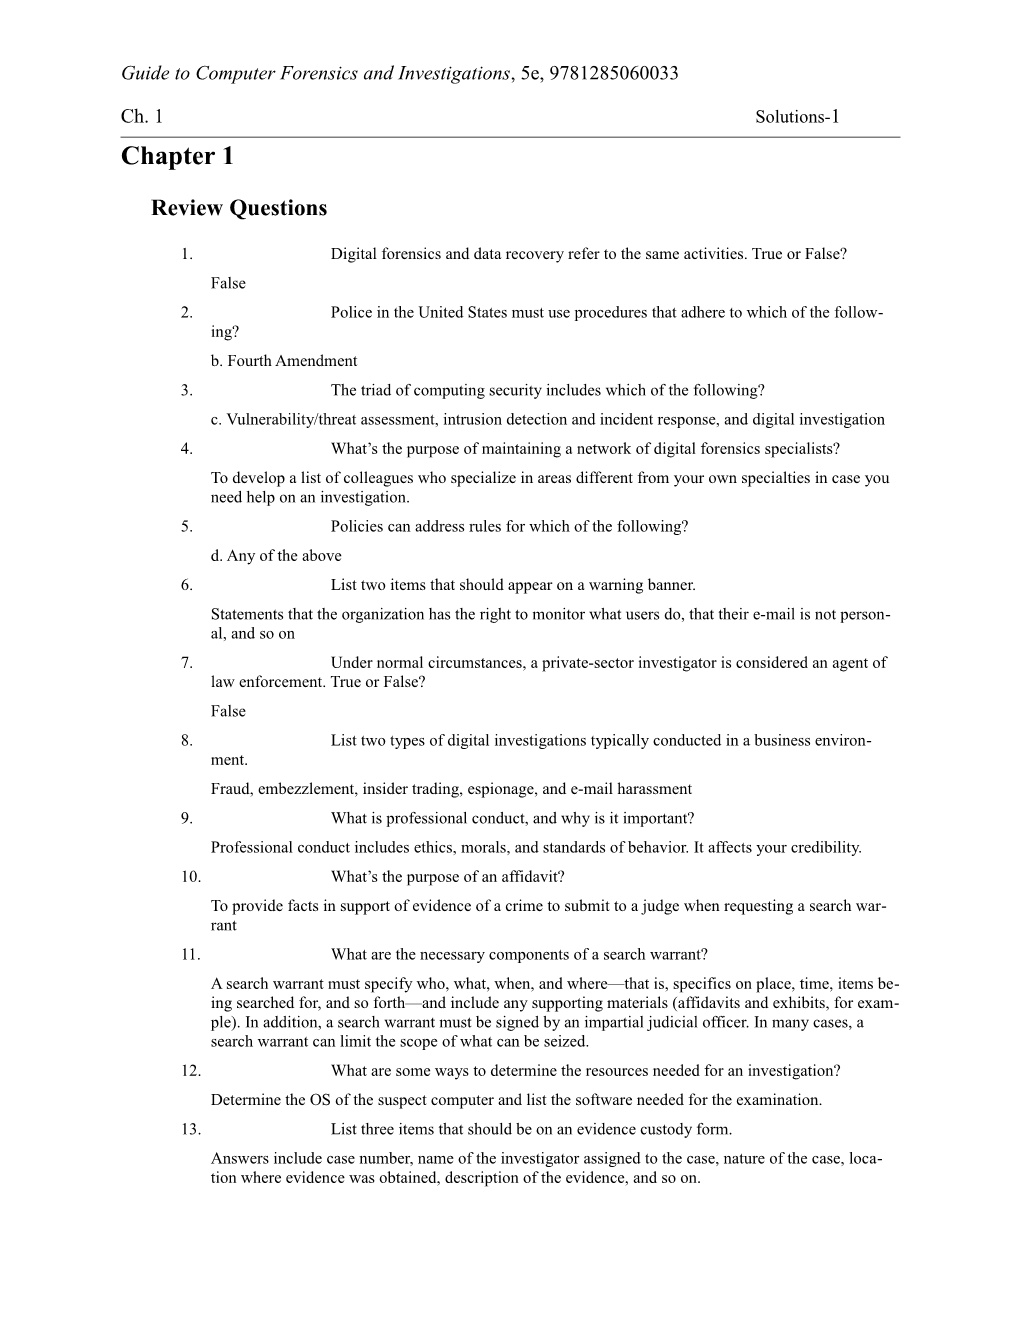 Chapter One - Review Questions Answers